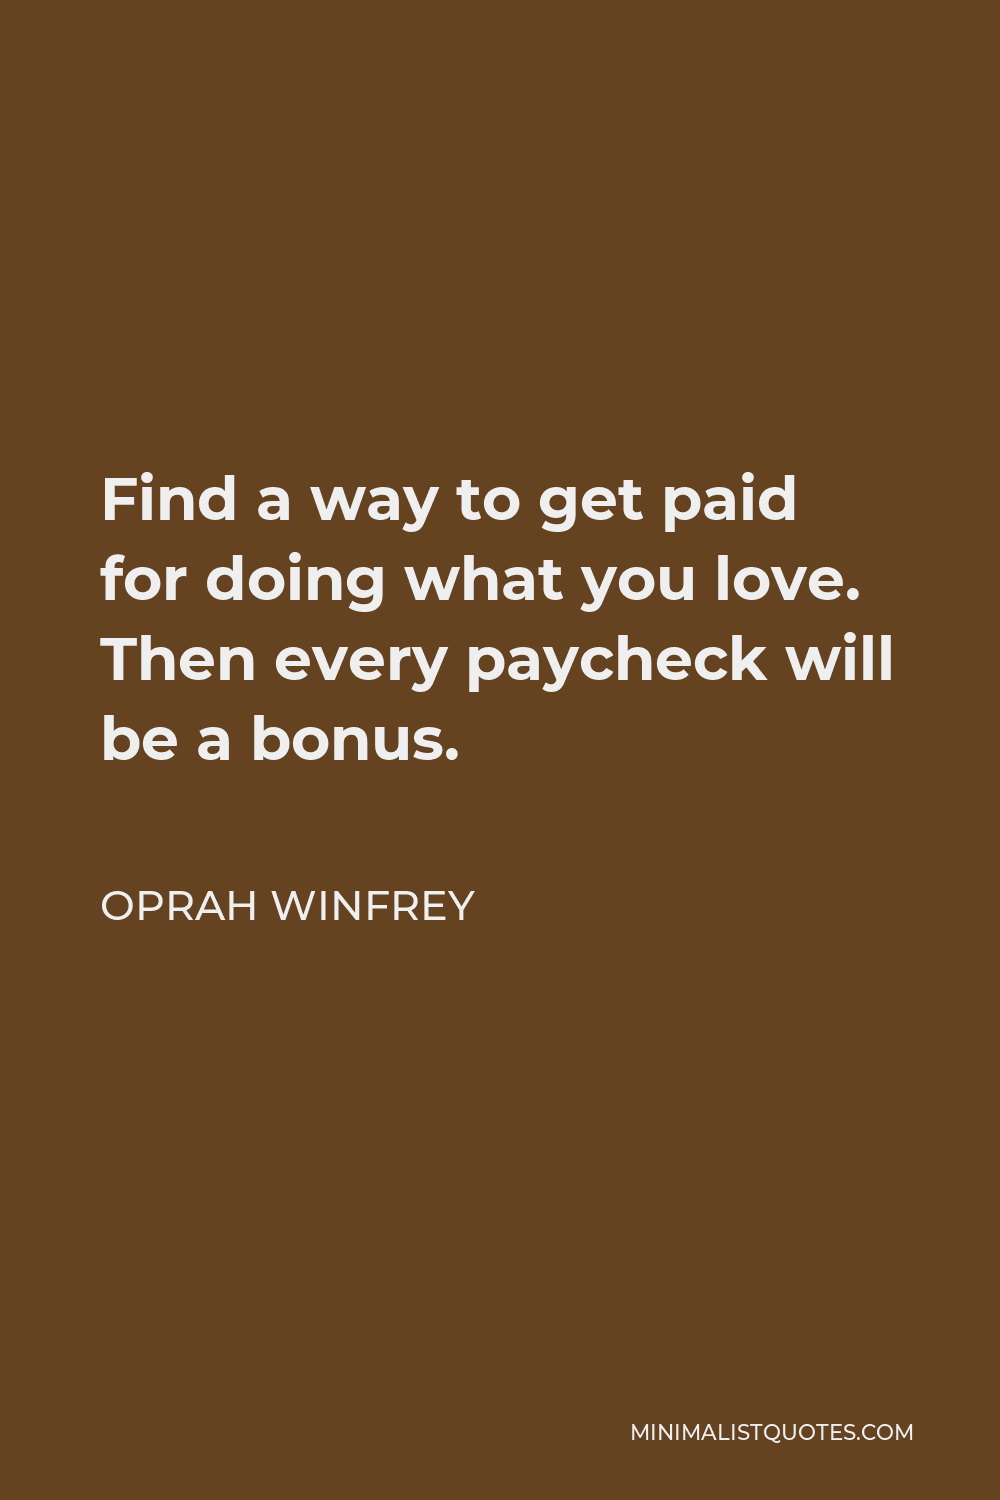 Oprah Winfrey Quote - Find a way to get paid for doing what you love. Then every paycheck will be a bonus.